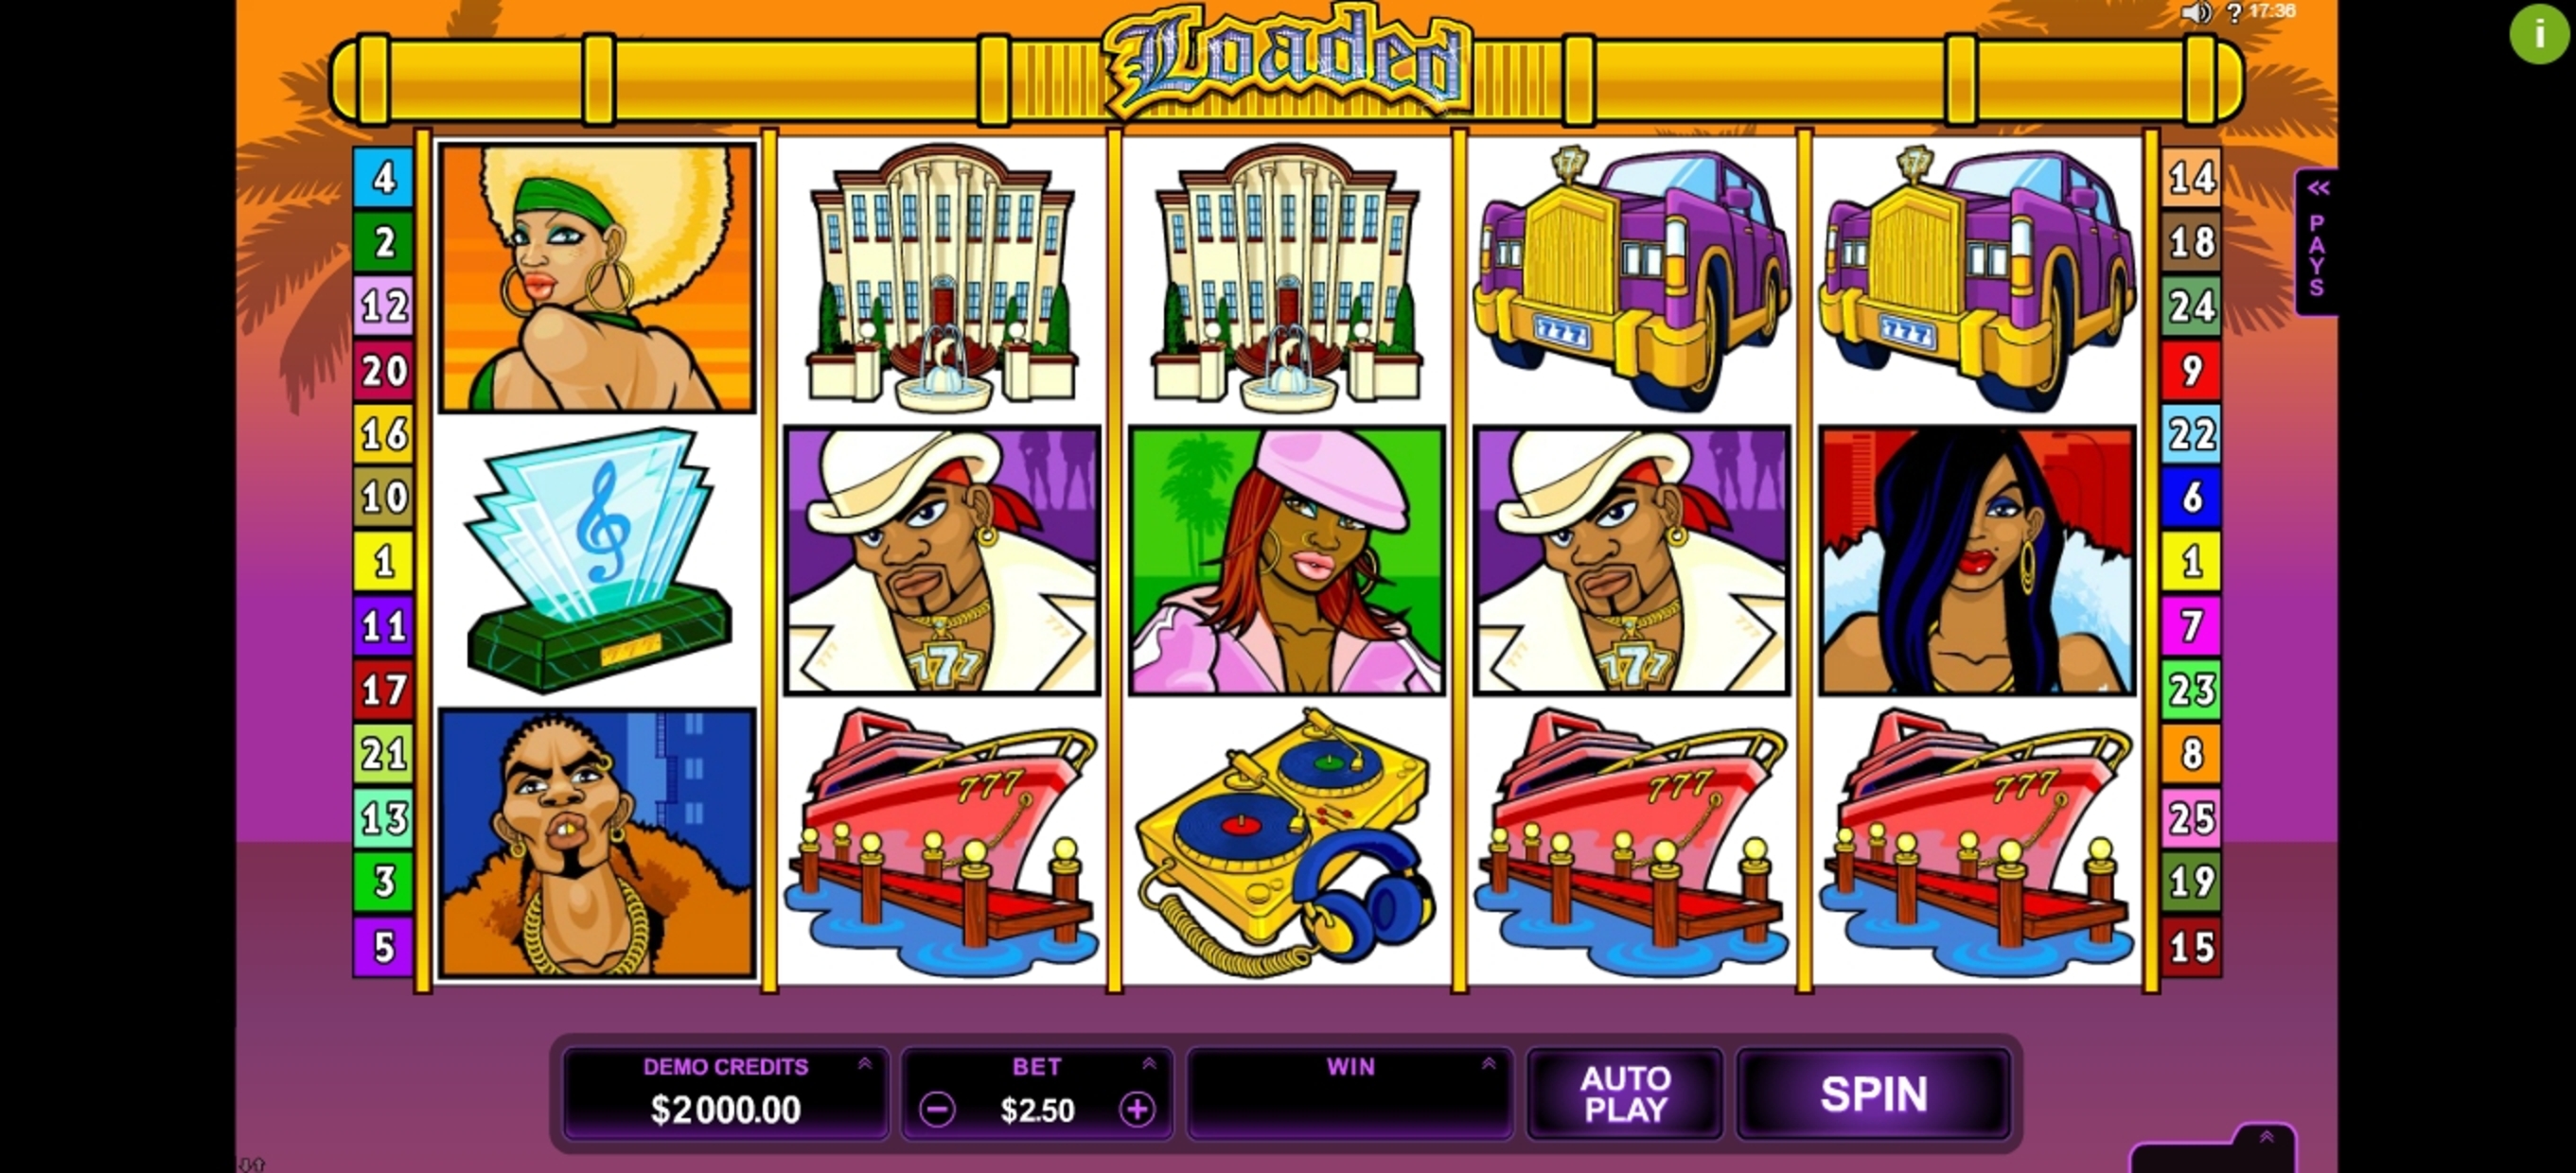 Reels in Loaded Slot Game by Microgaming